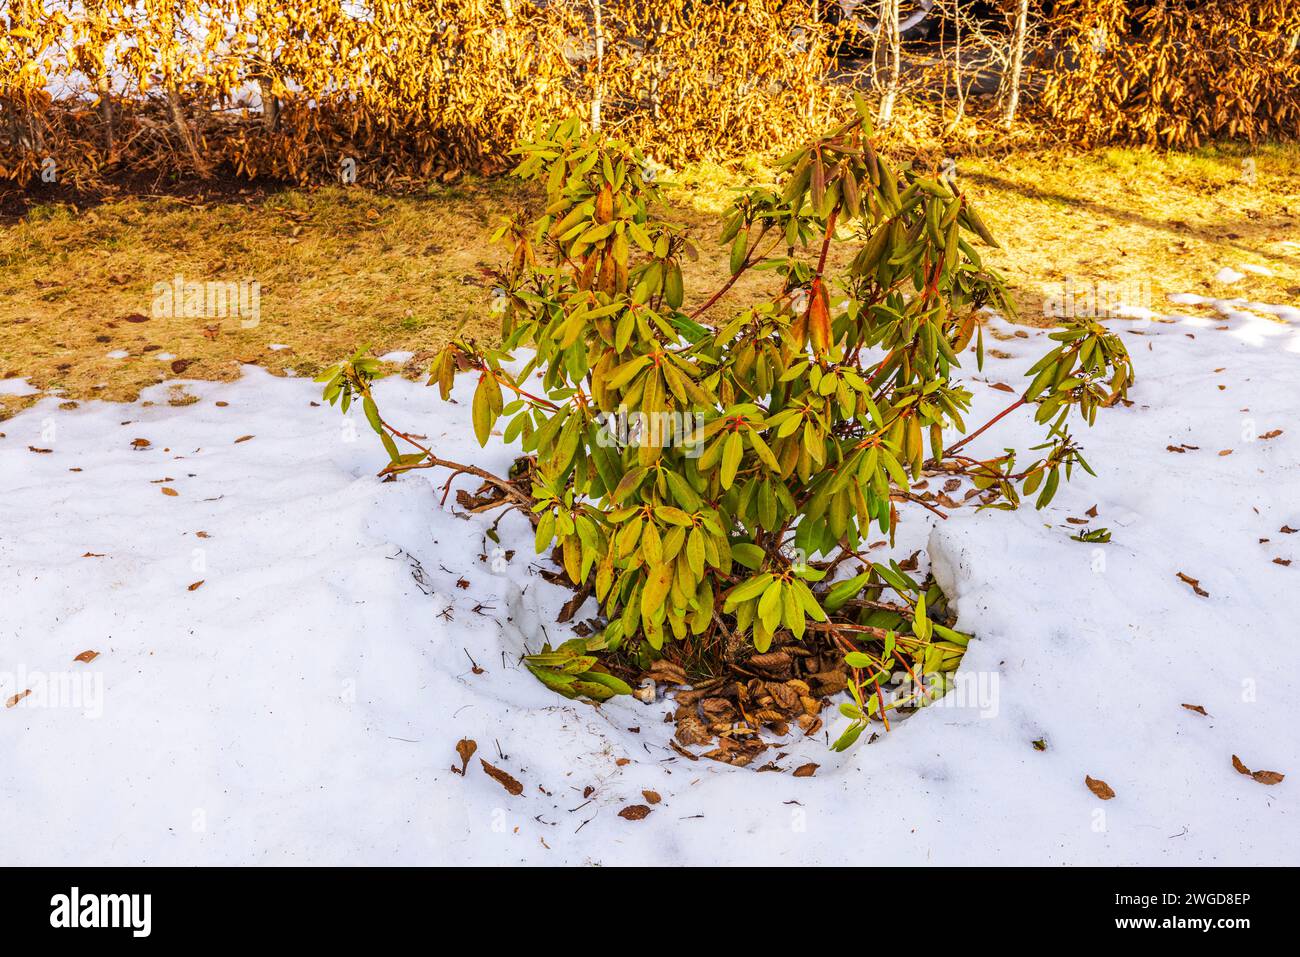 Close-up view of a garden with a bush of rhododendron flowers on a spring day as the snow melts. Sweden. Stock Photo